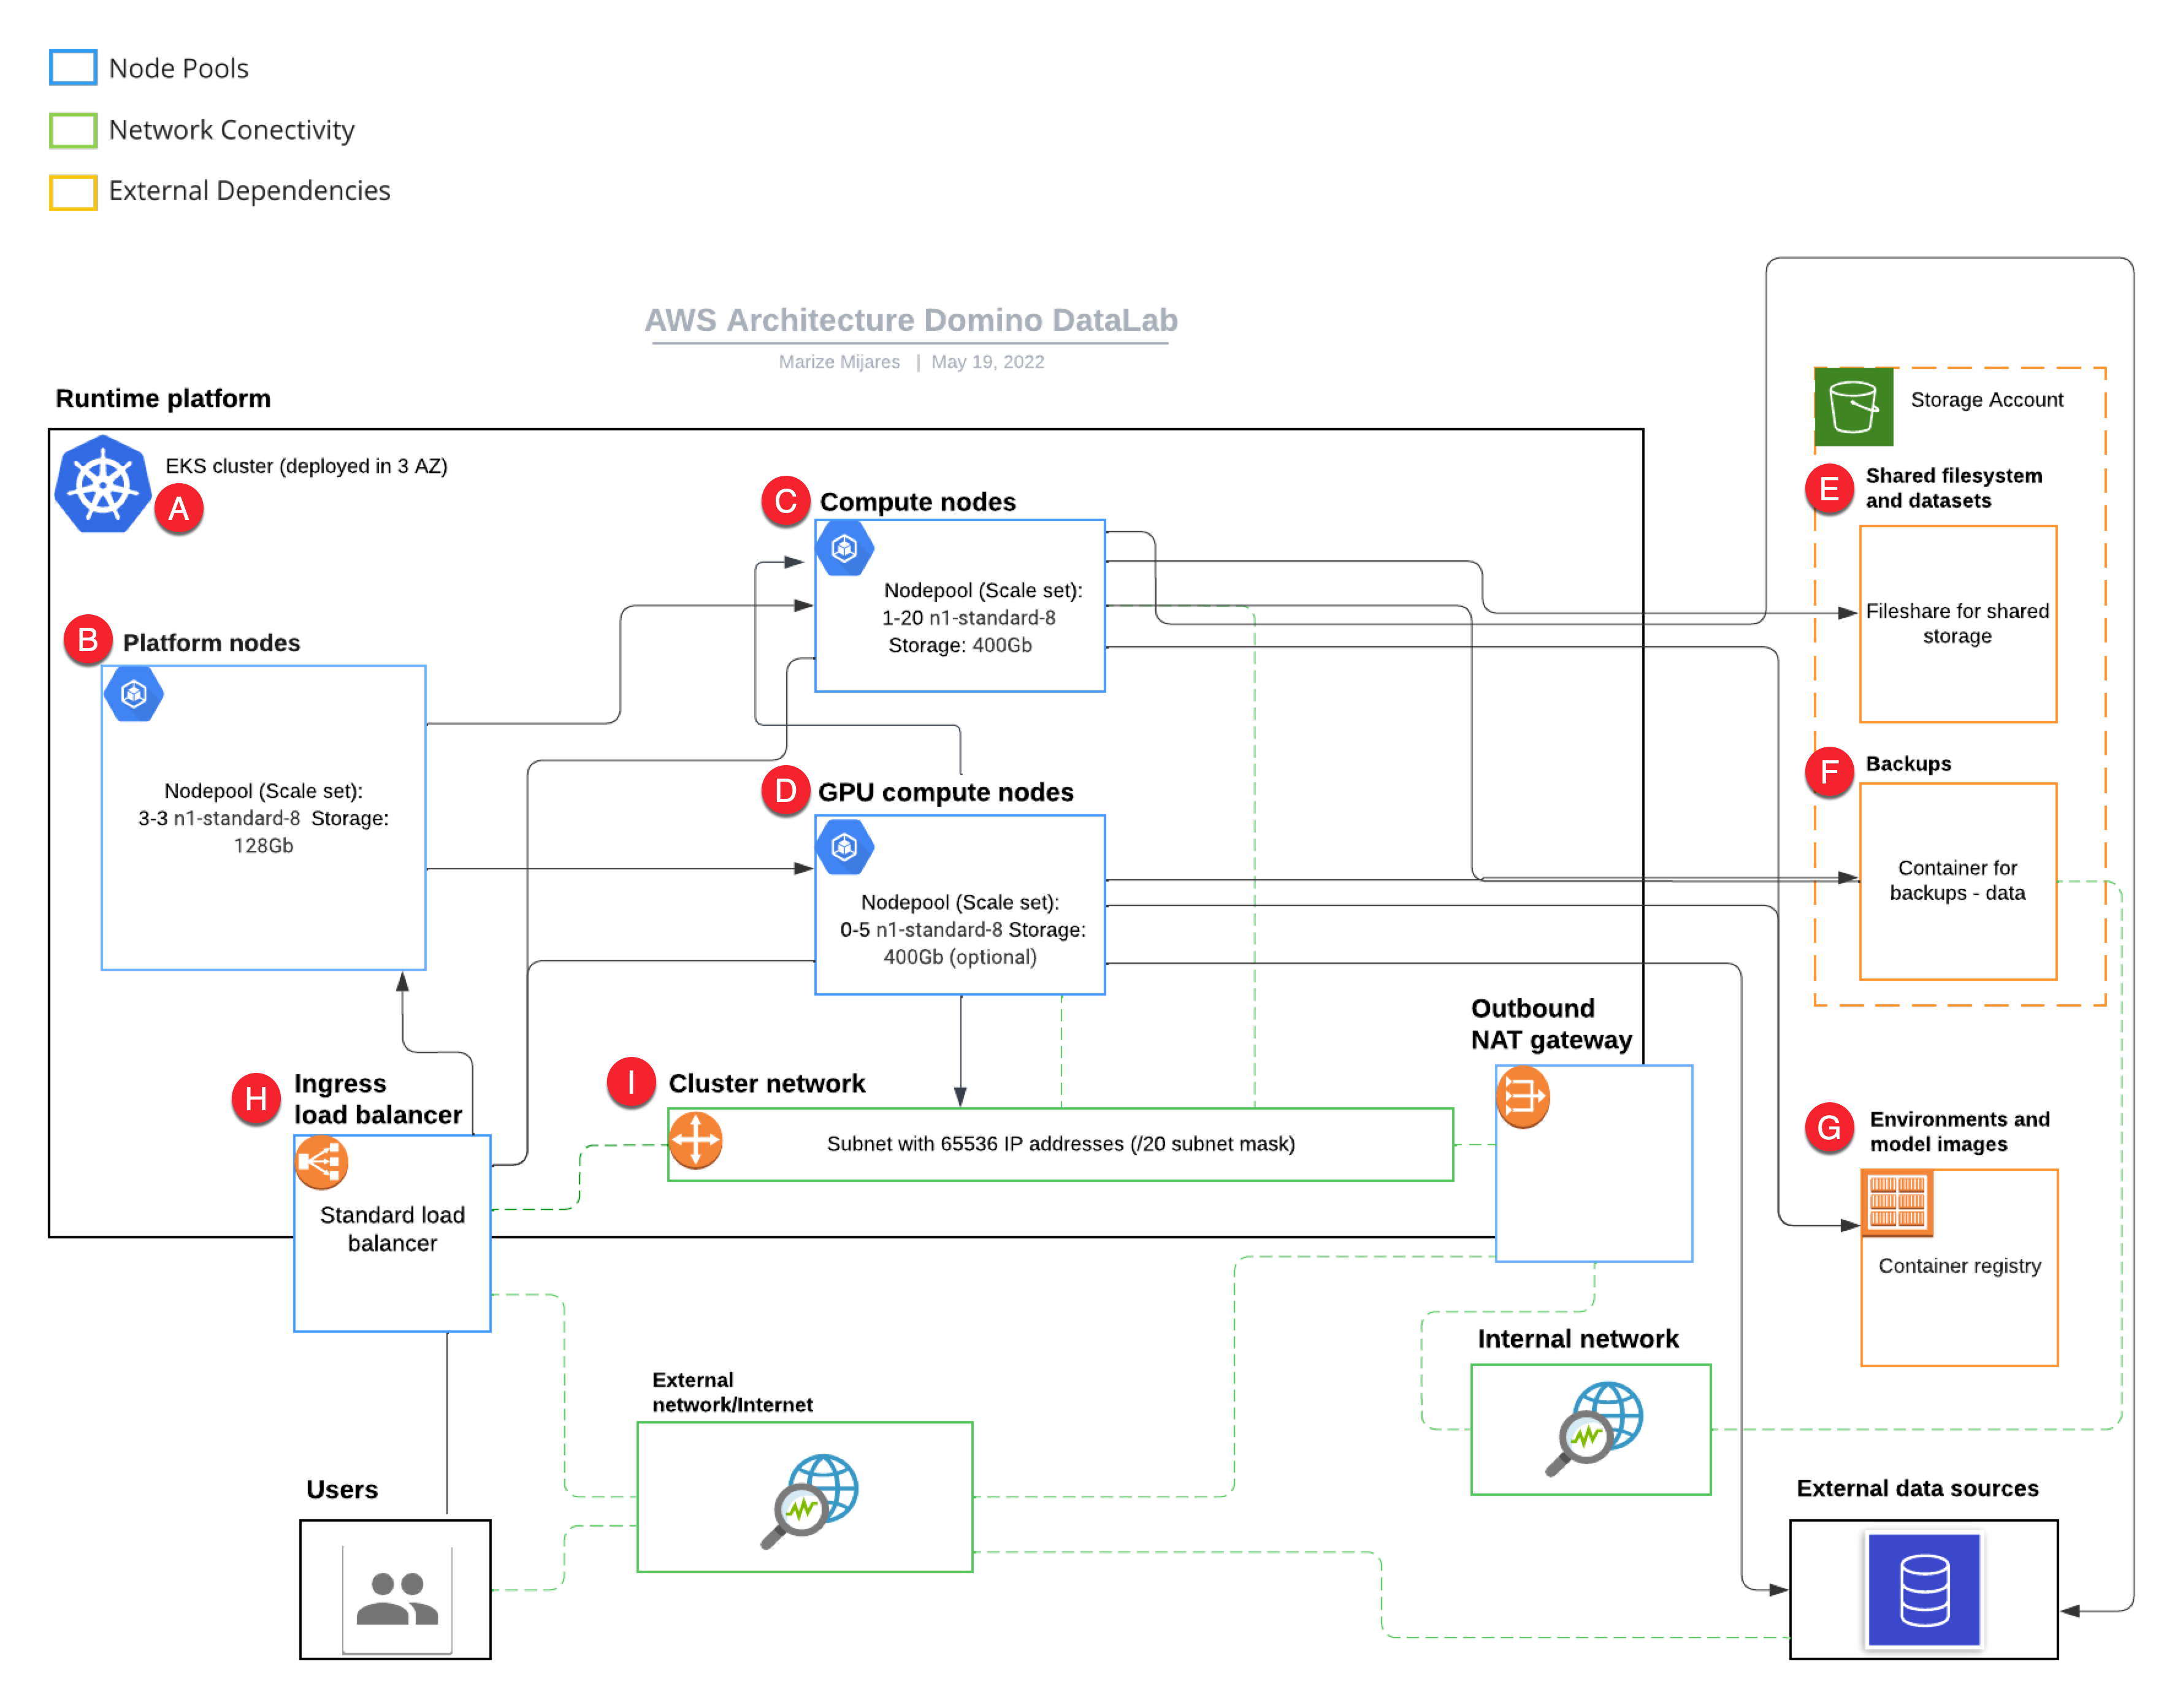 A map of the Amazon Web Services architecture you’ll need to set up a Domino deployment